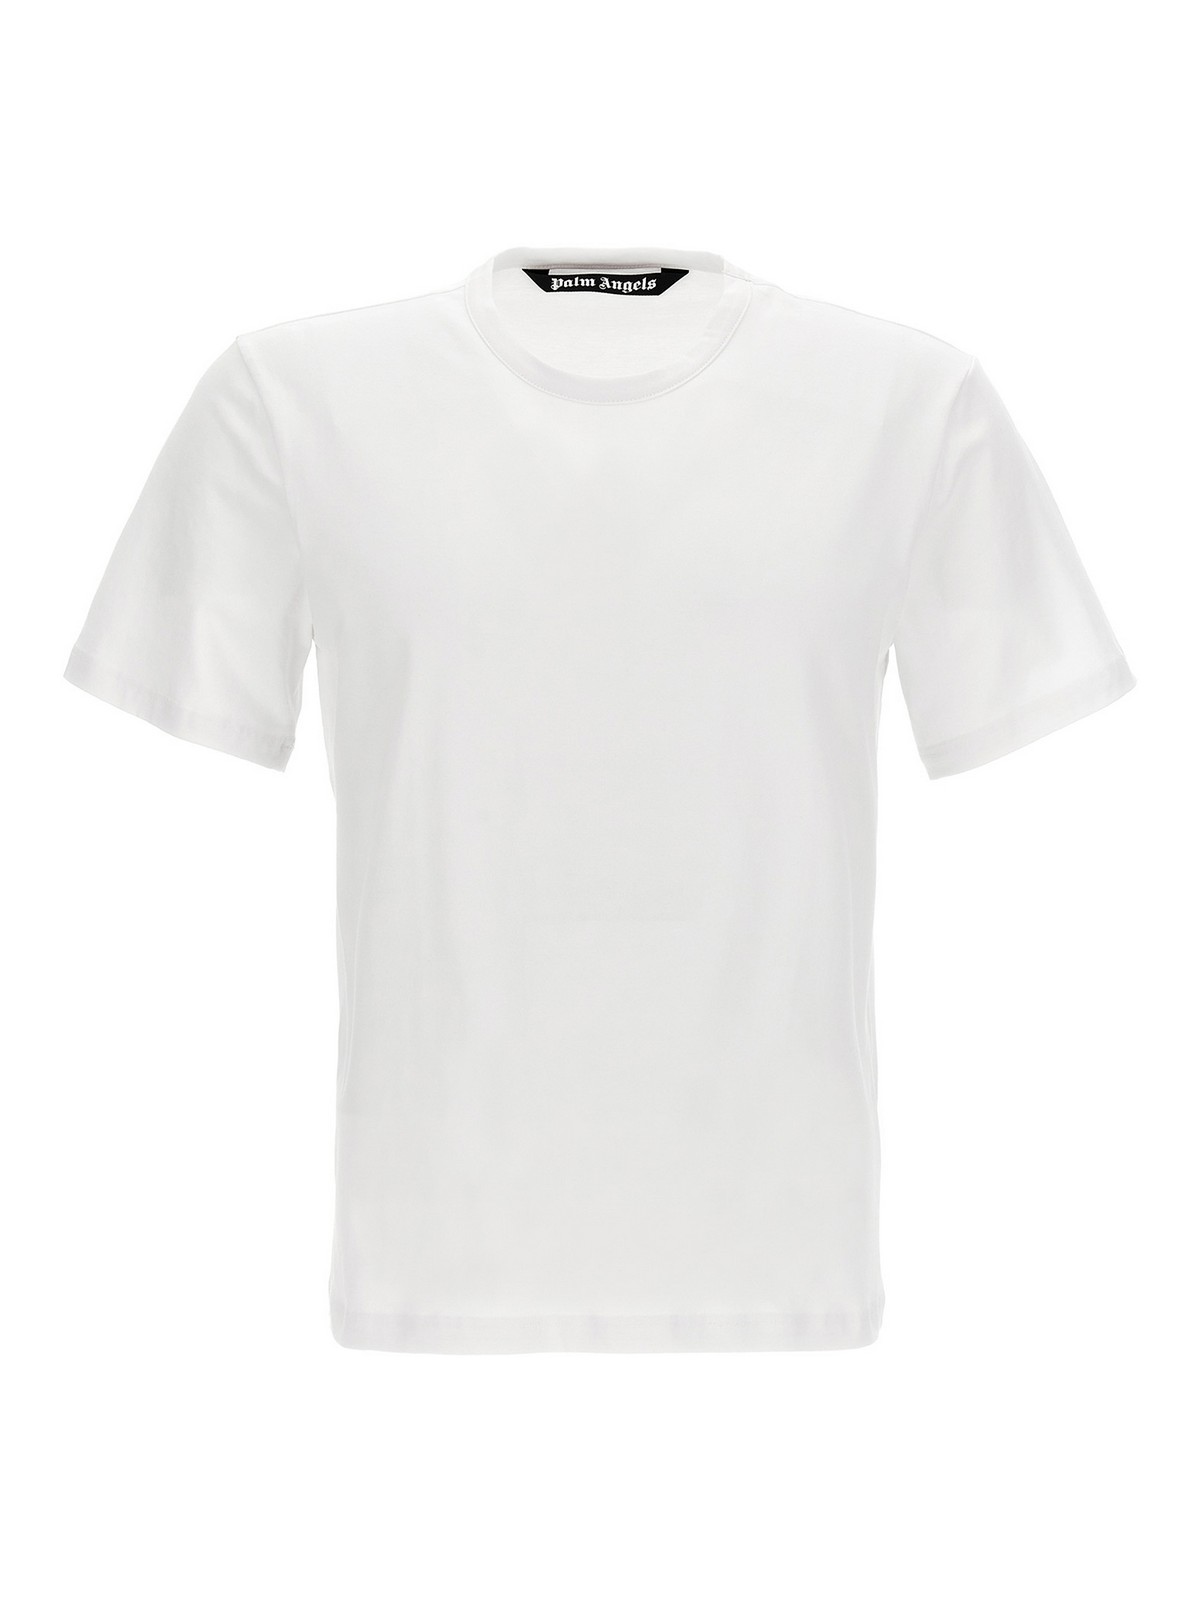 Enzo From The Tropics T-Shirt in white - Palm Angels® Official